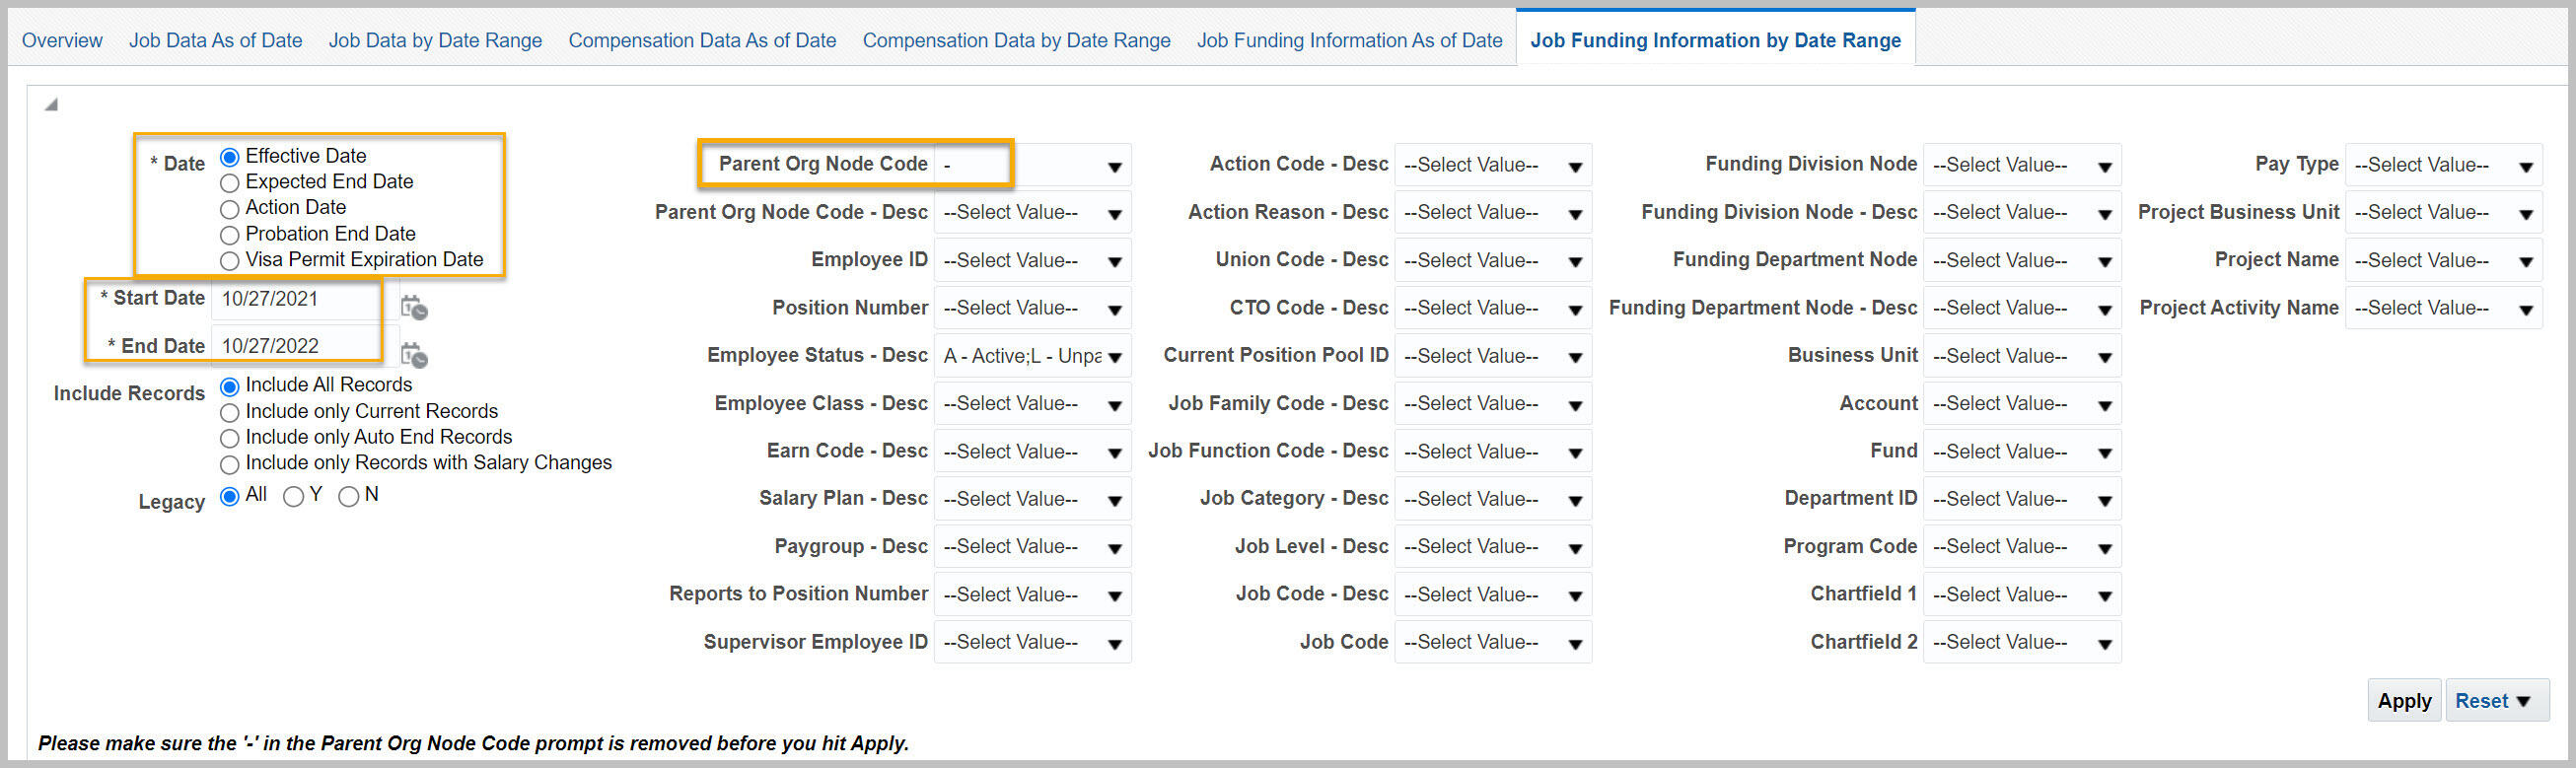 Filters for Workforce Detail, Job Funding Information by Date Range